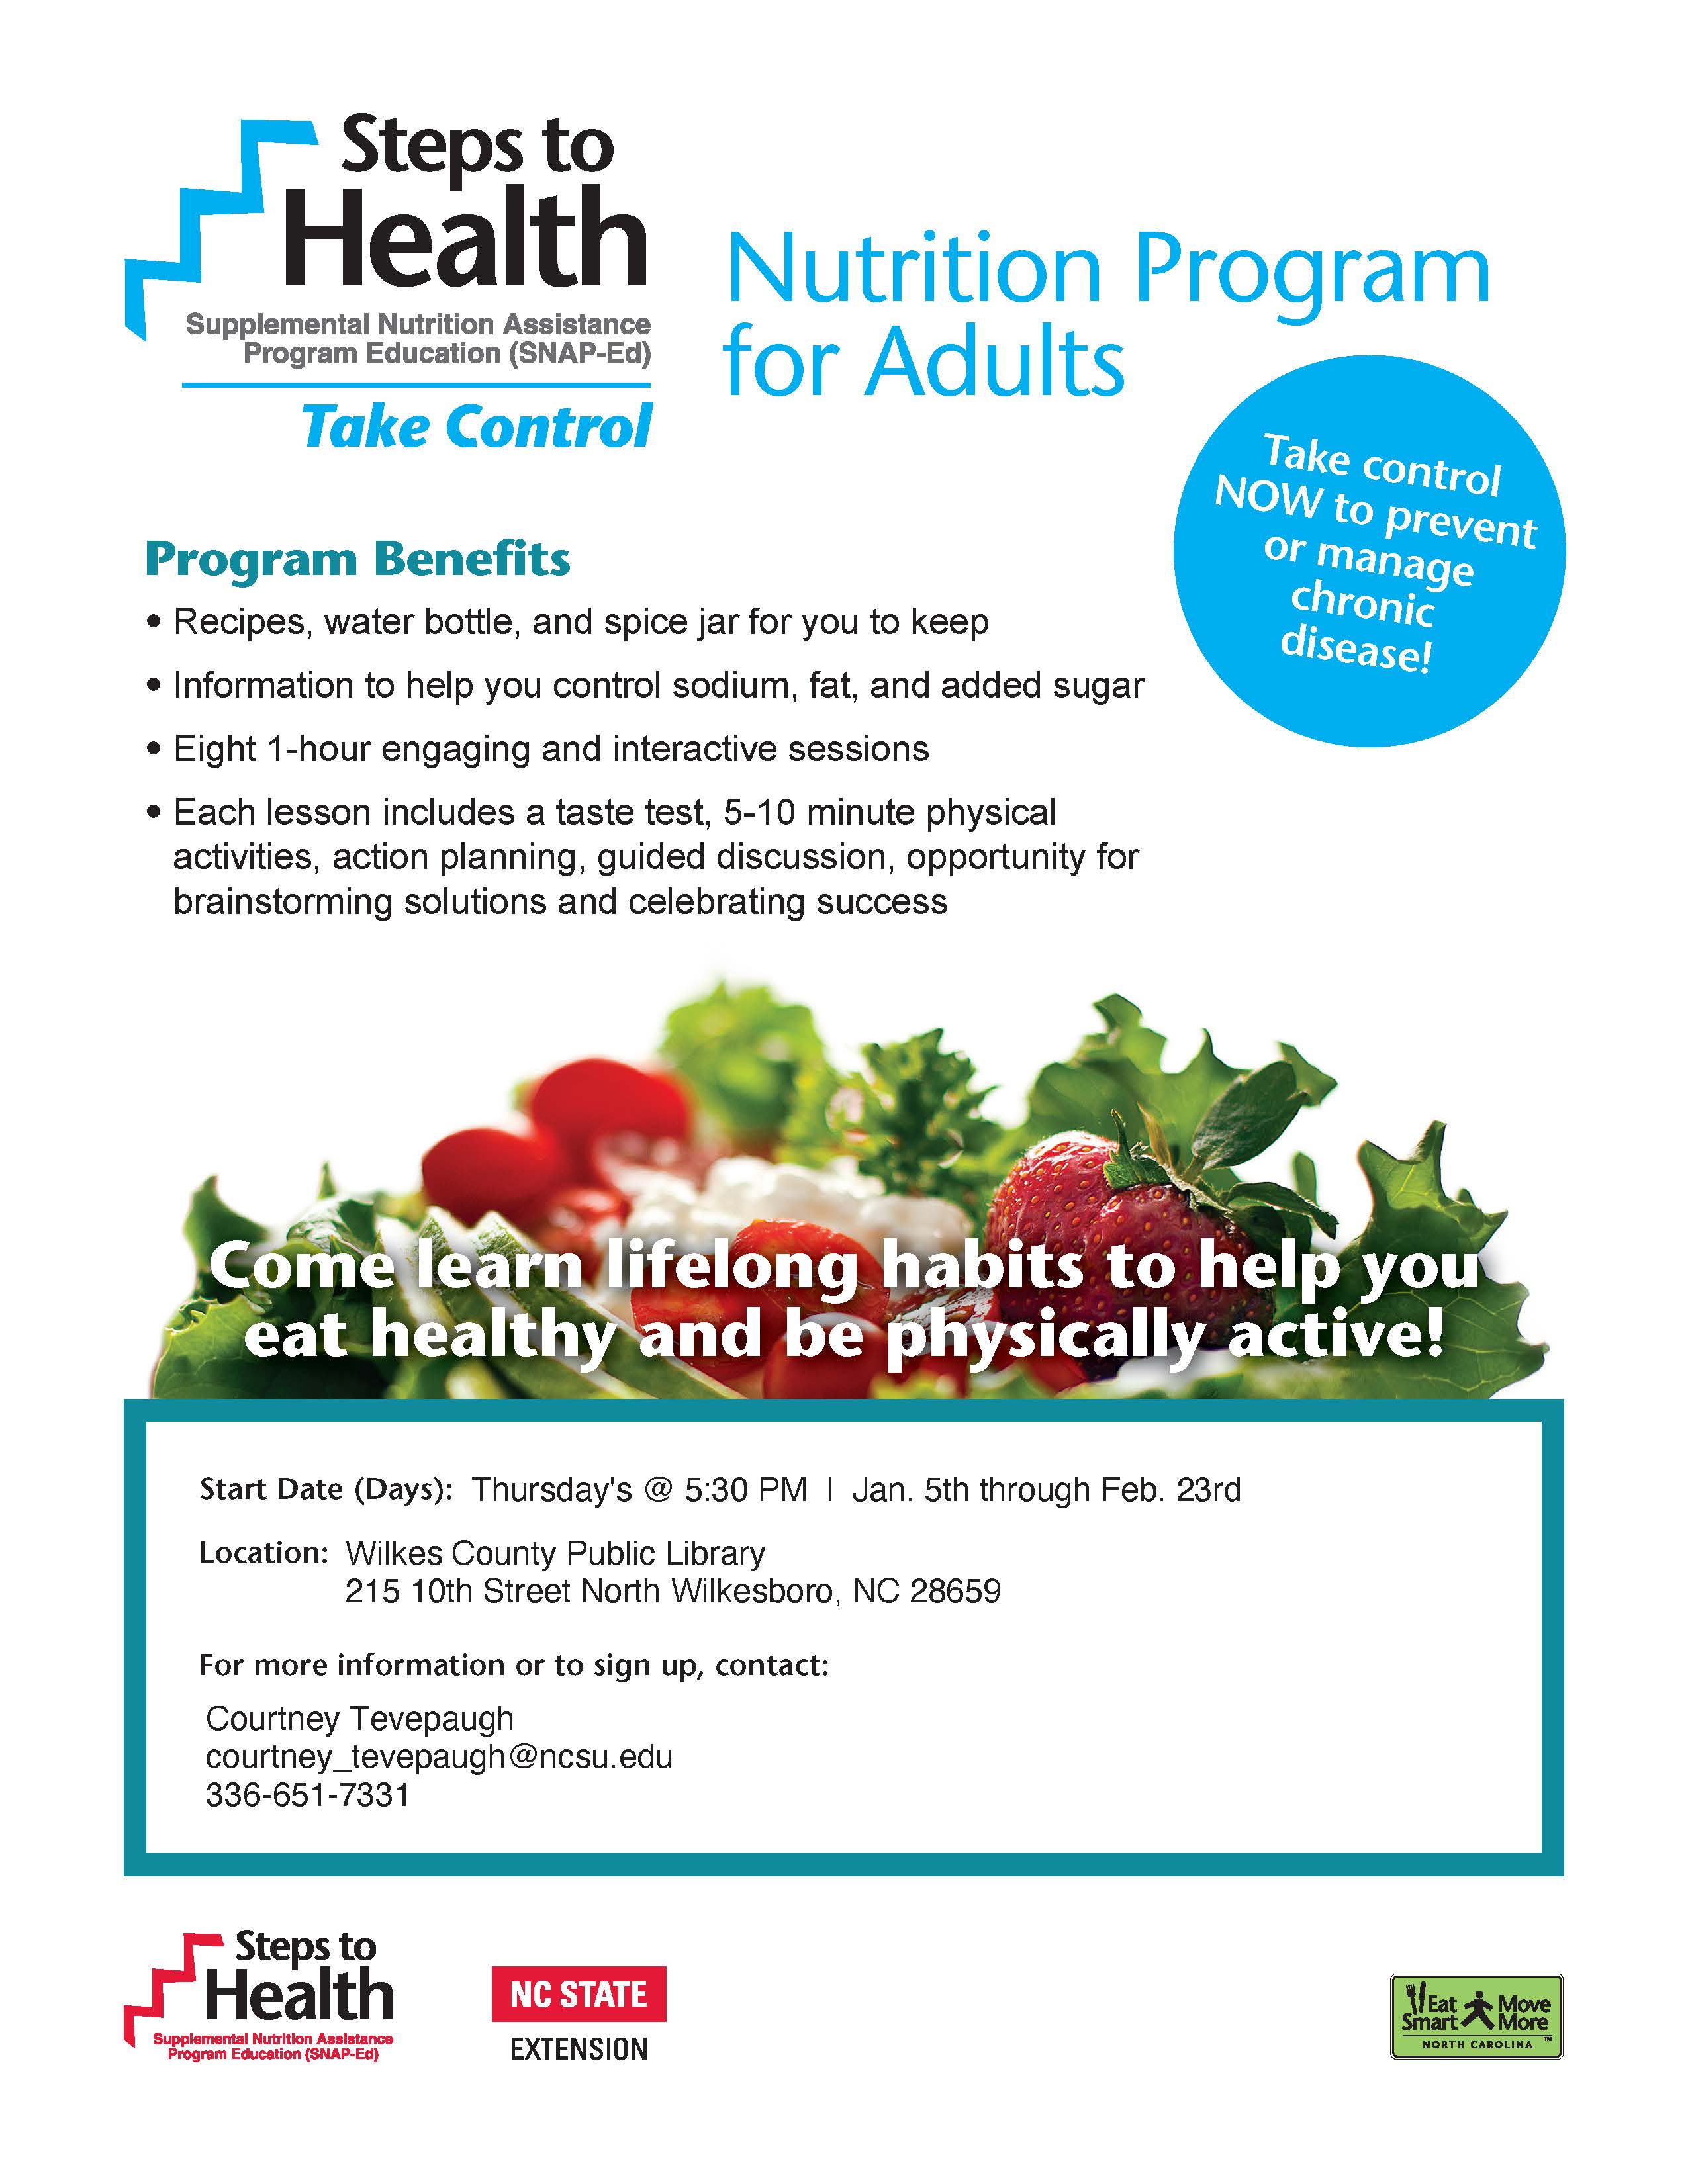 Steps to Health flyer.